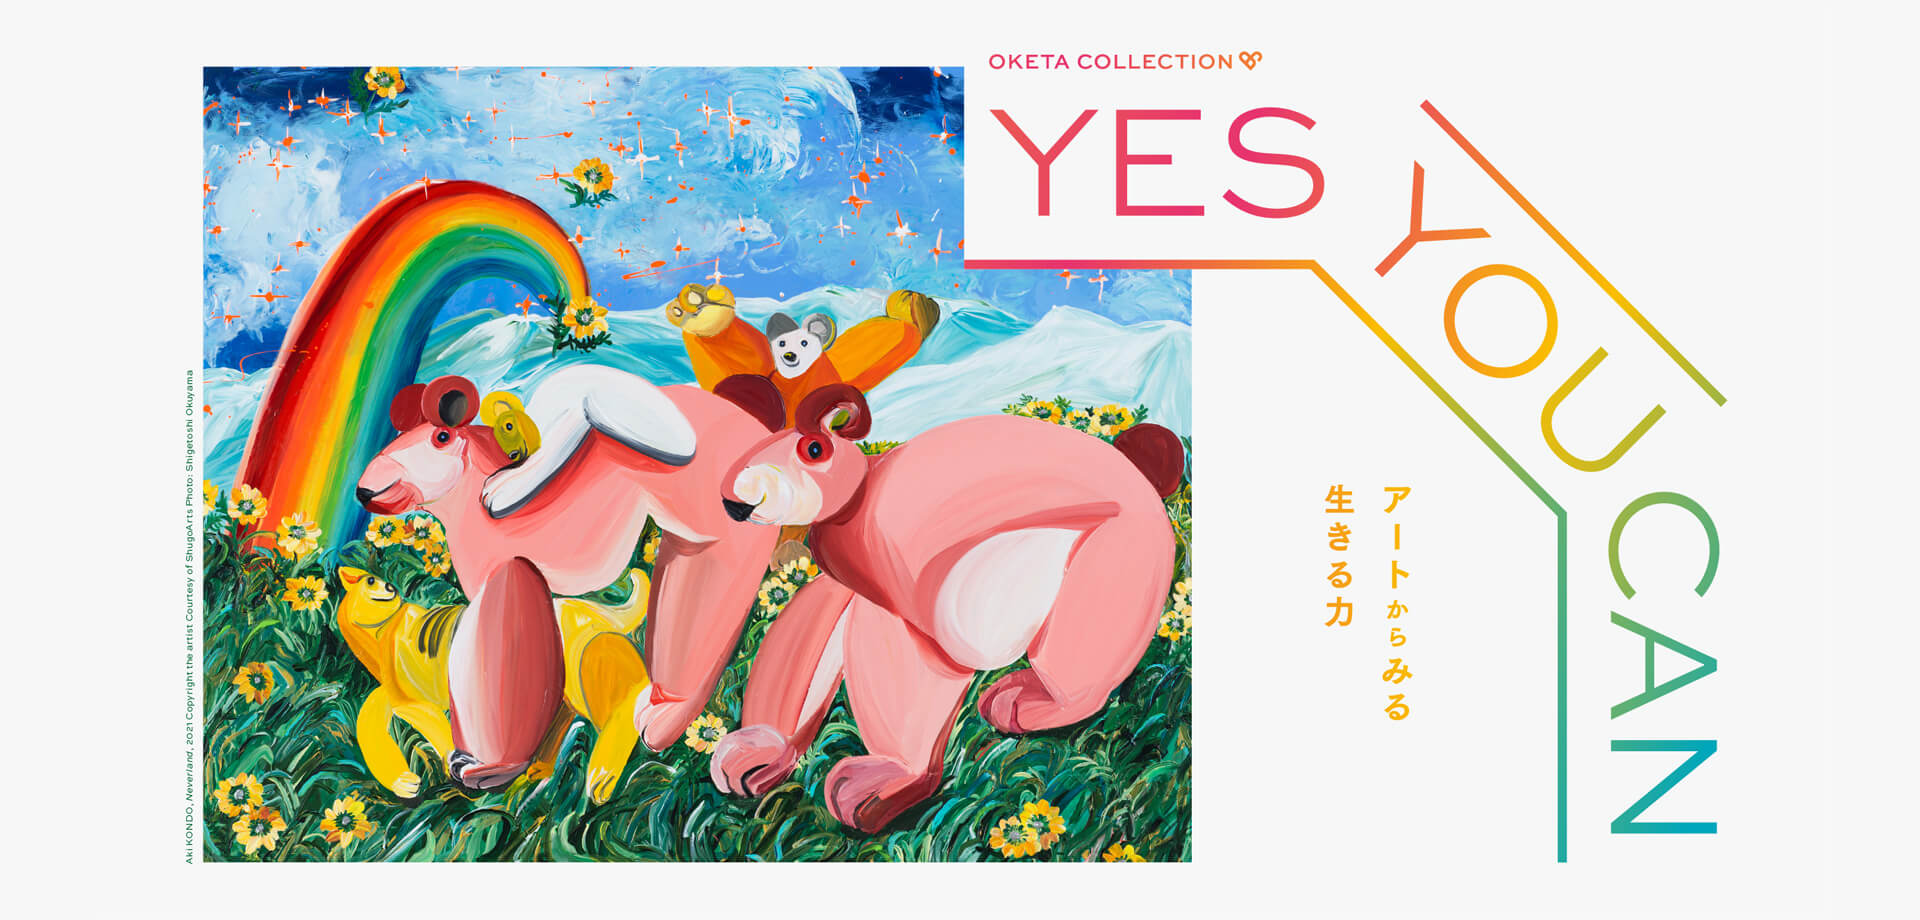 OKETA COLLECTION「YES YOU CAN −アートからみる生きる力−」展